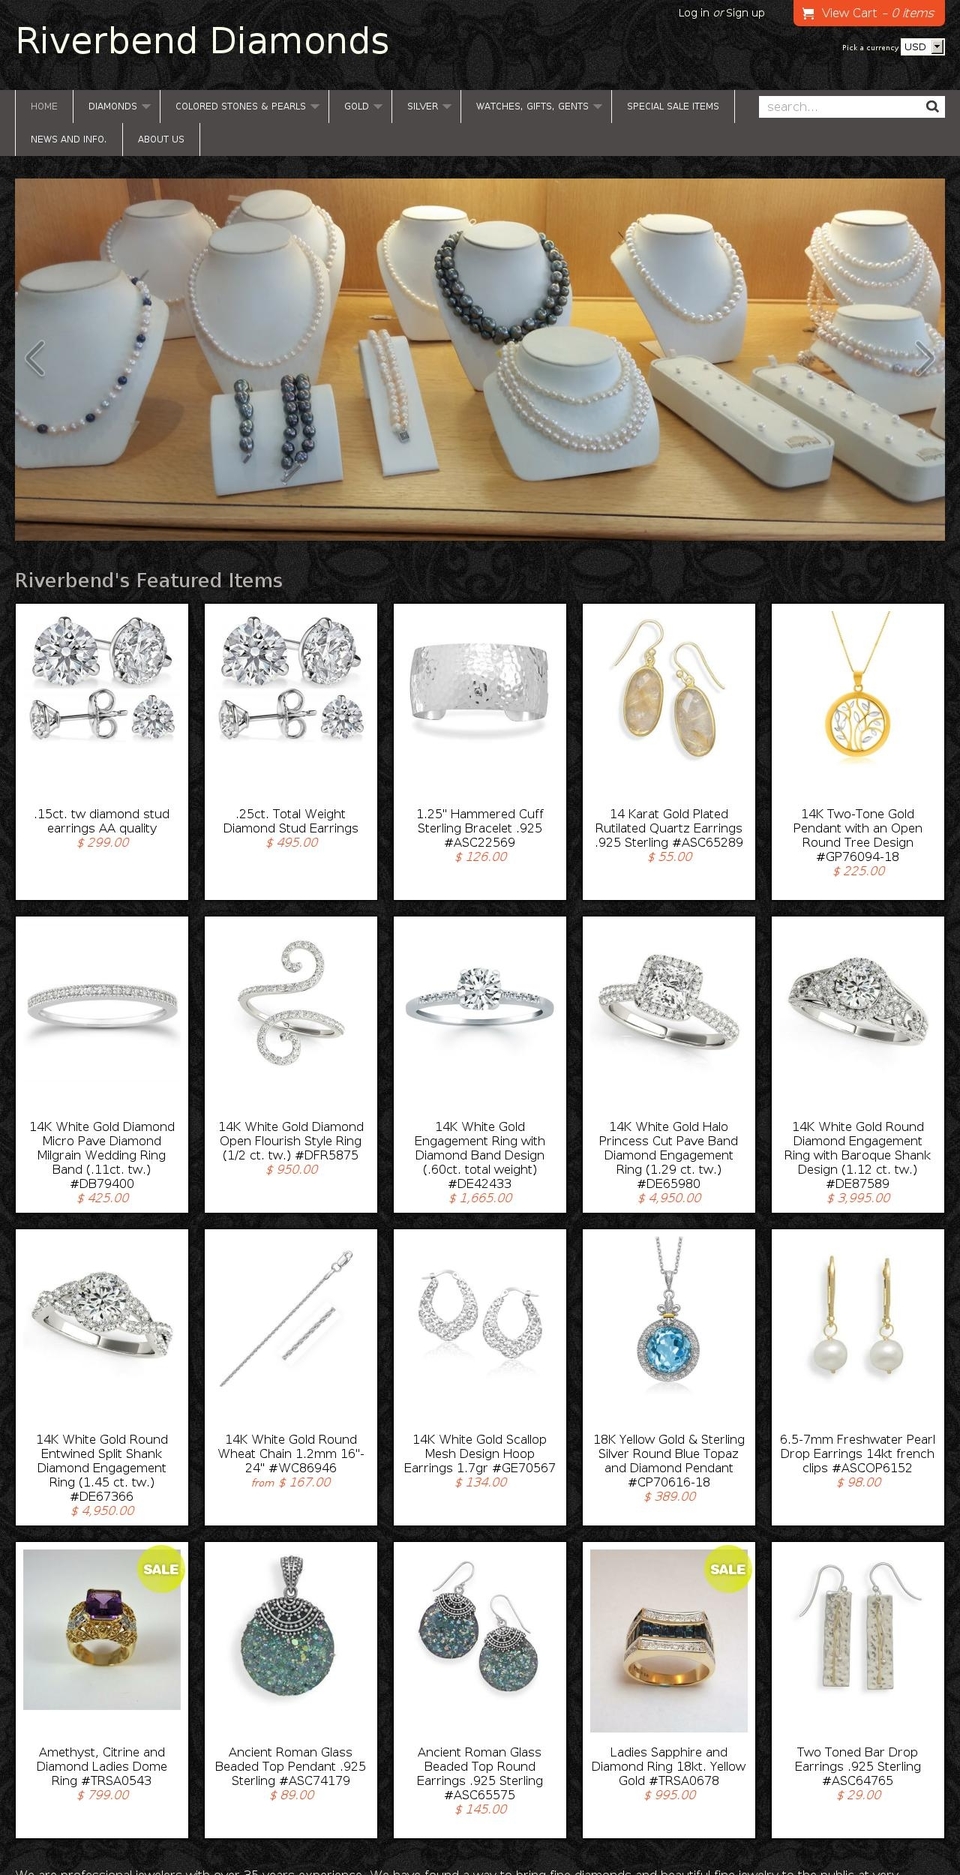 Fresh Shopify theme site example riverbendfinejewelry.com